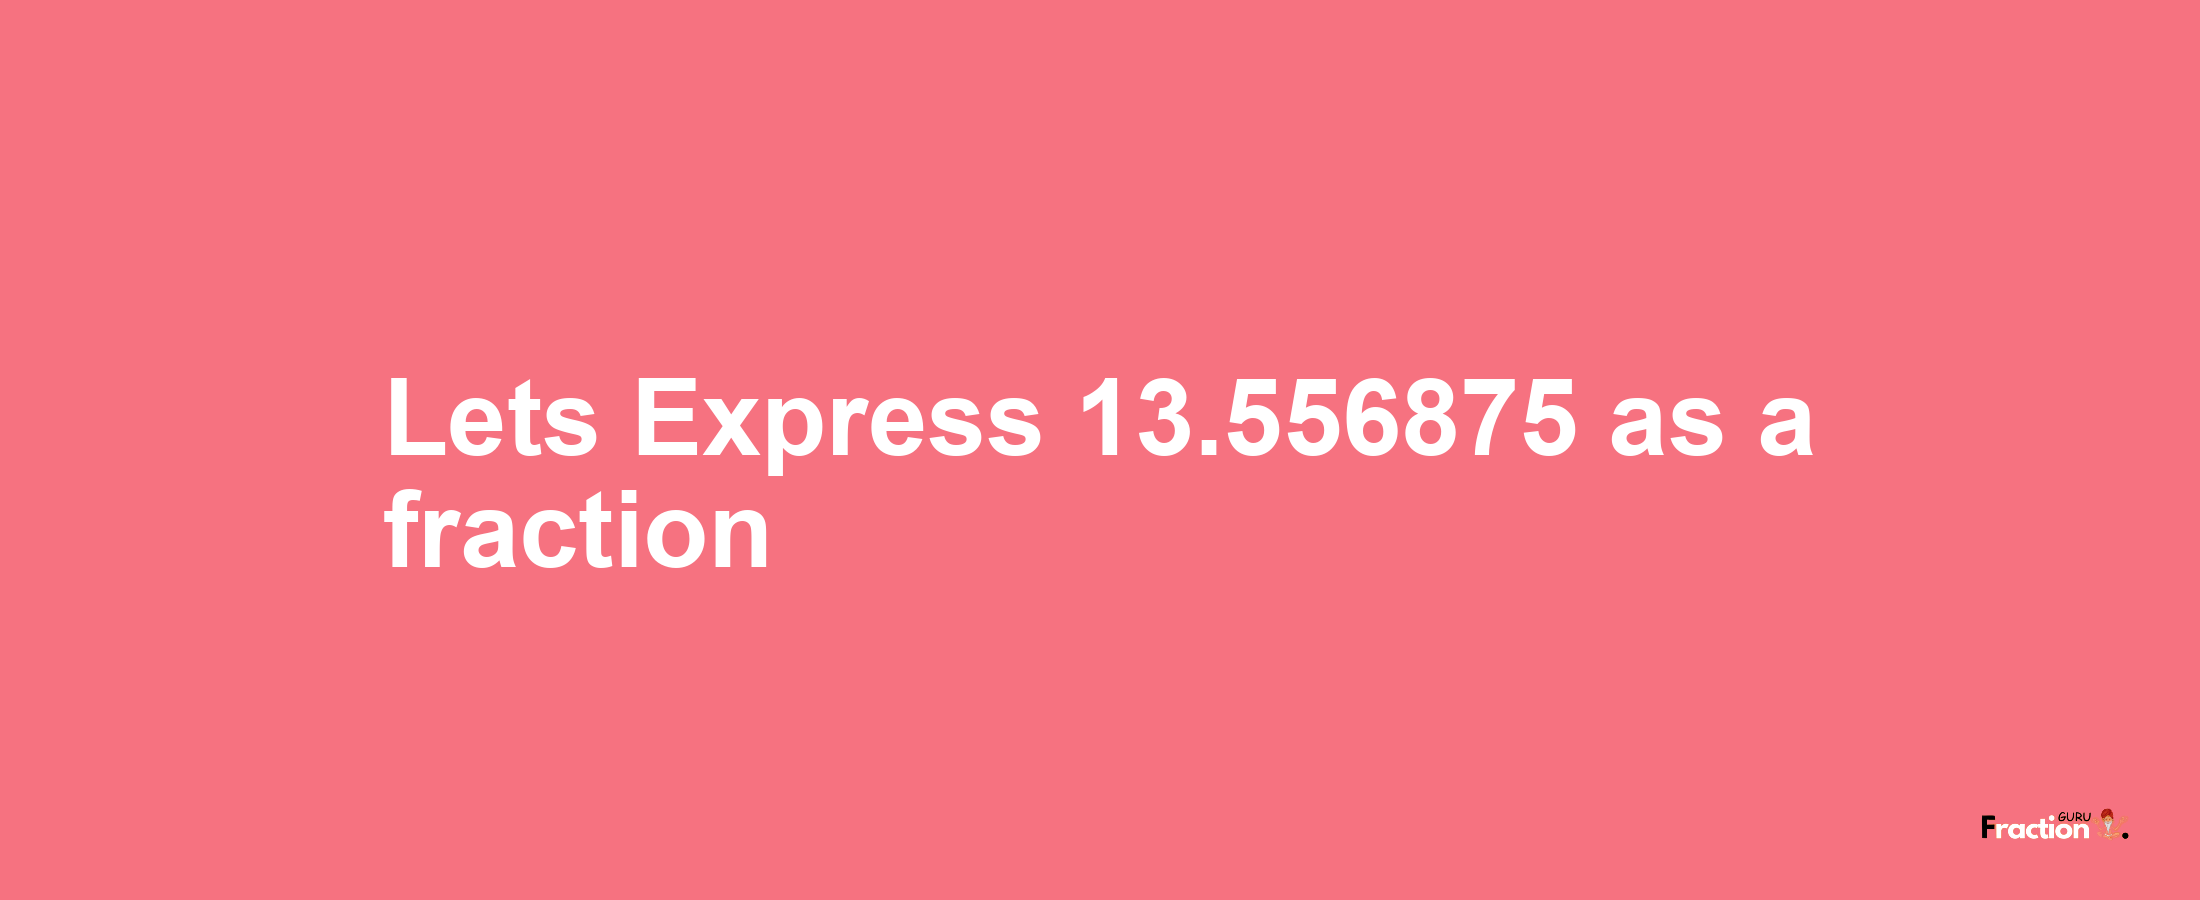 Lets Express 13.556875 as afraction